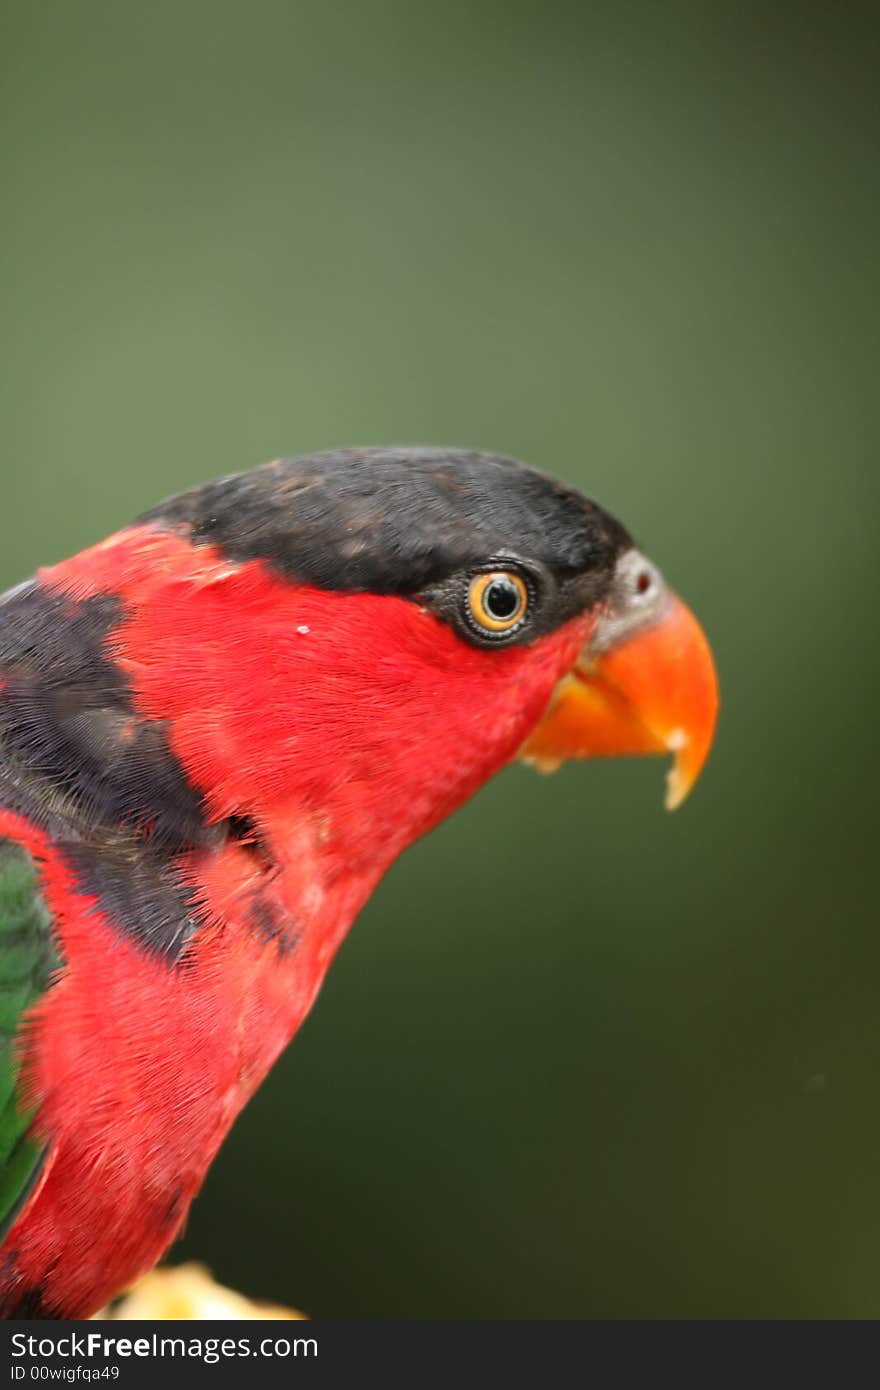 Black Capped Lory in Hong Kong, Asia